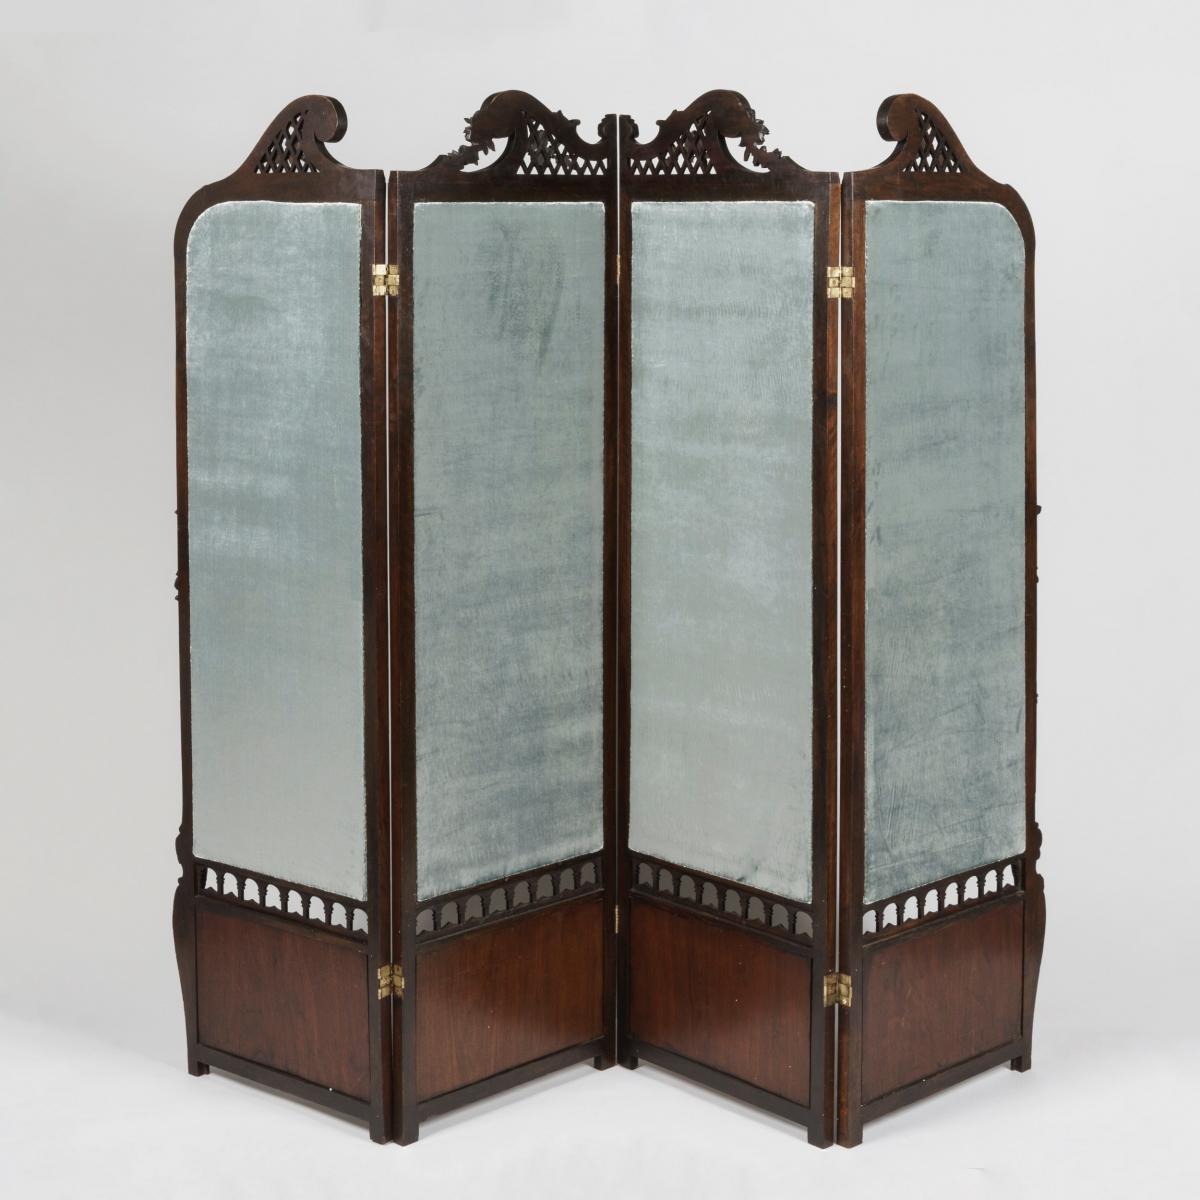 A Rare Four-Fold Screen The panels by Maud Earl